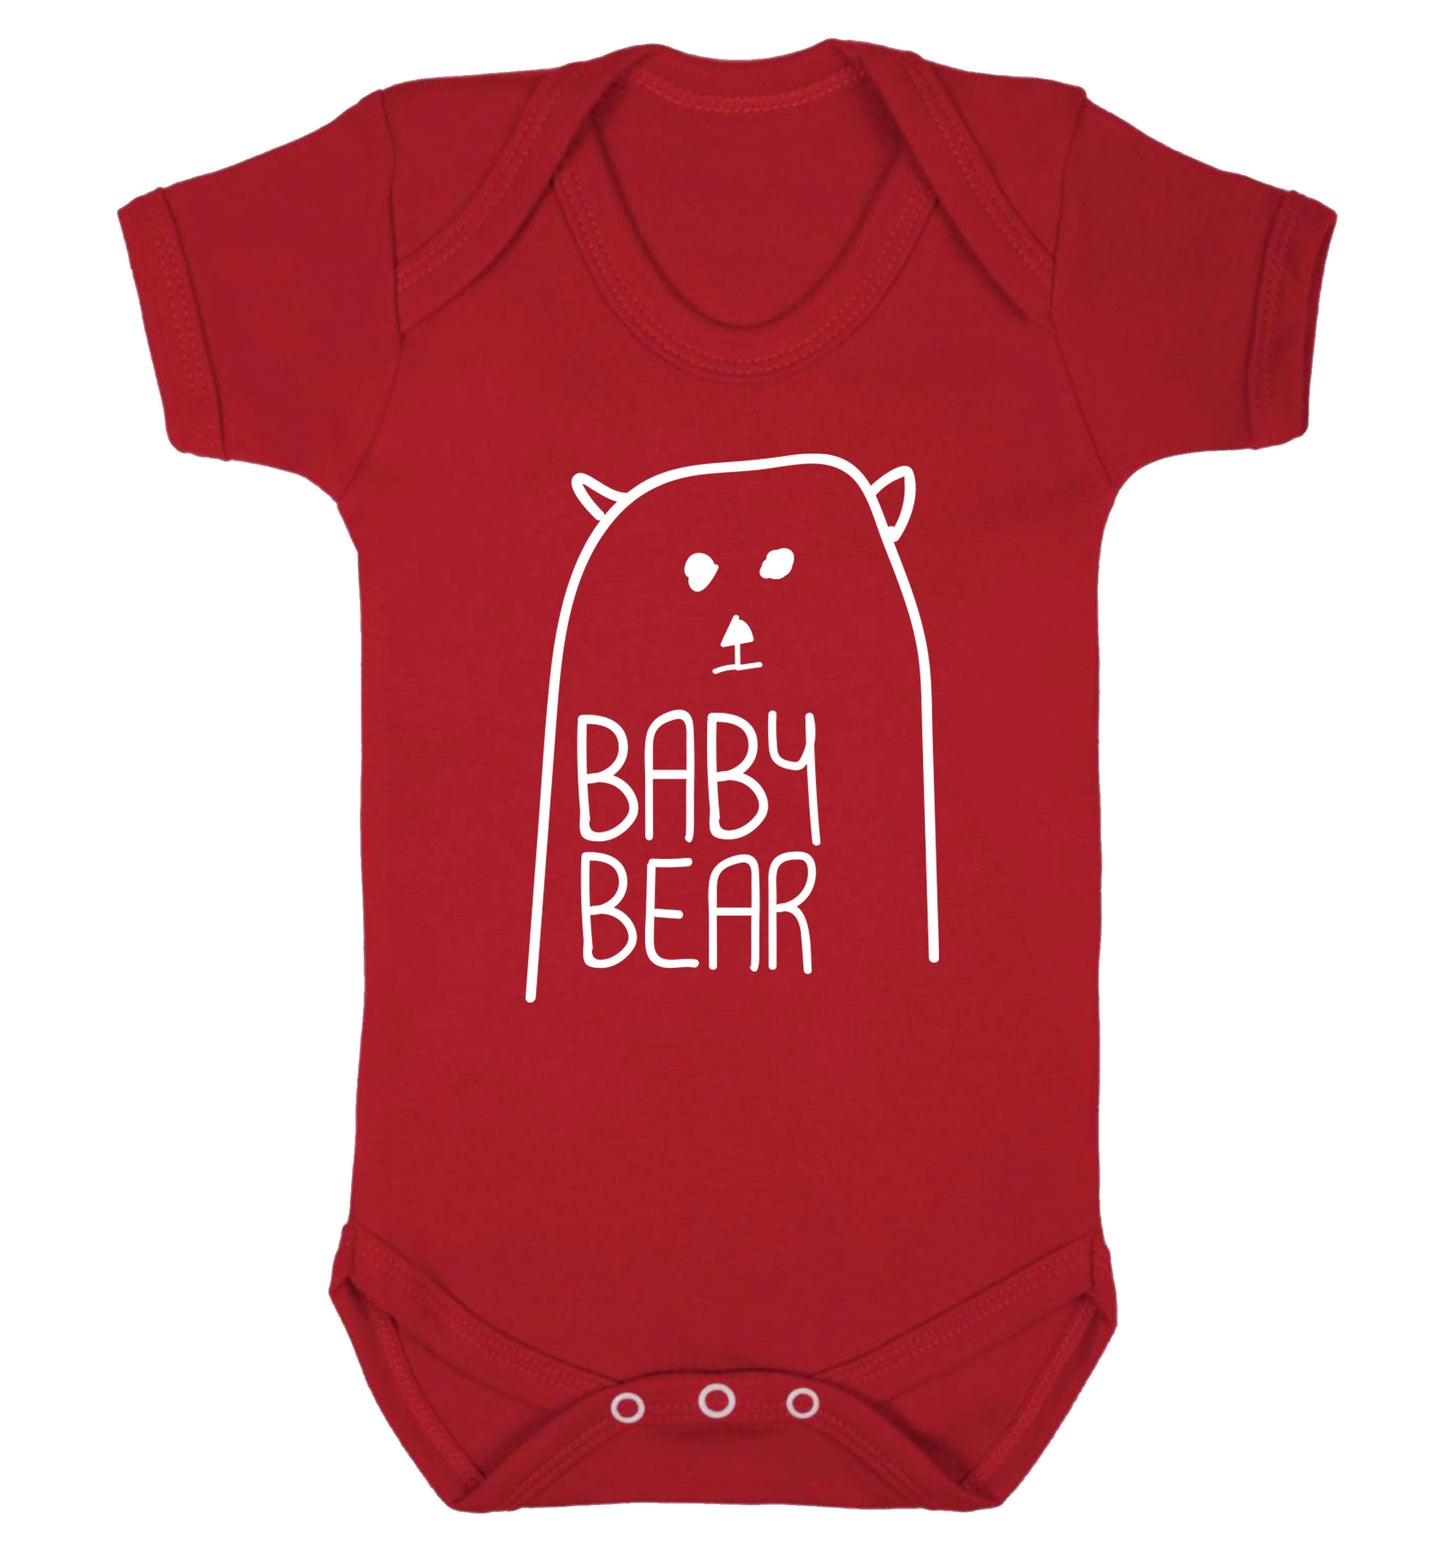 Baby bear Baby Vest red 18-24 months